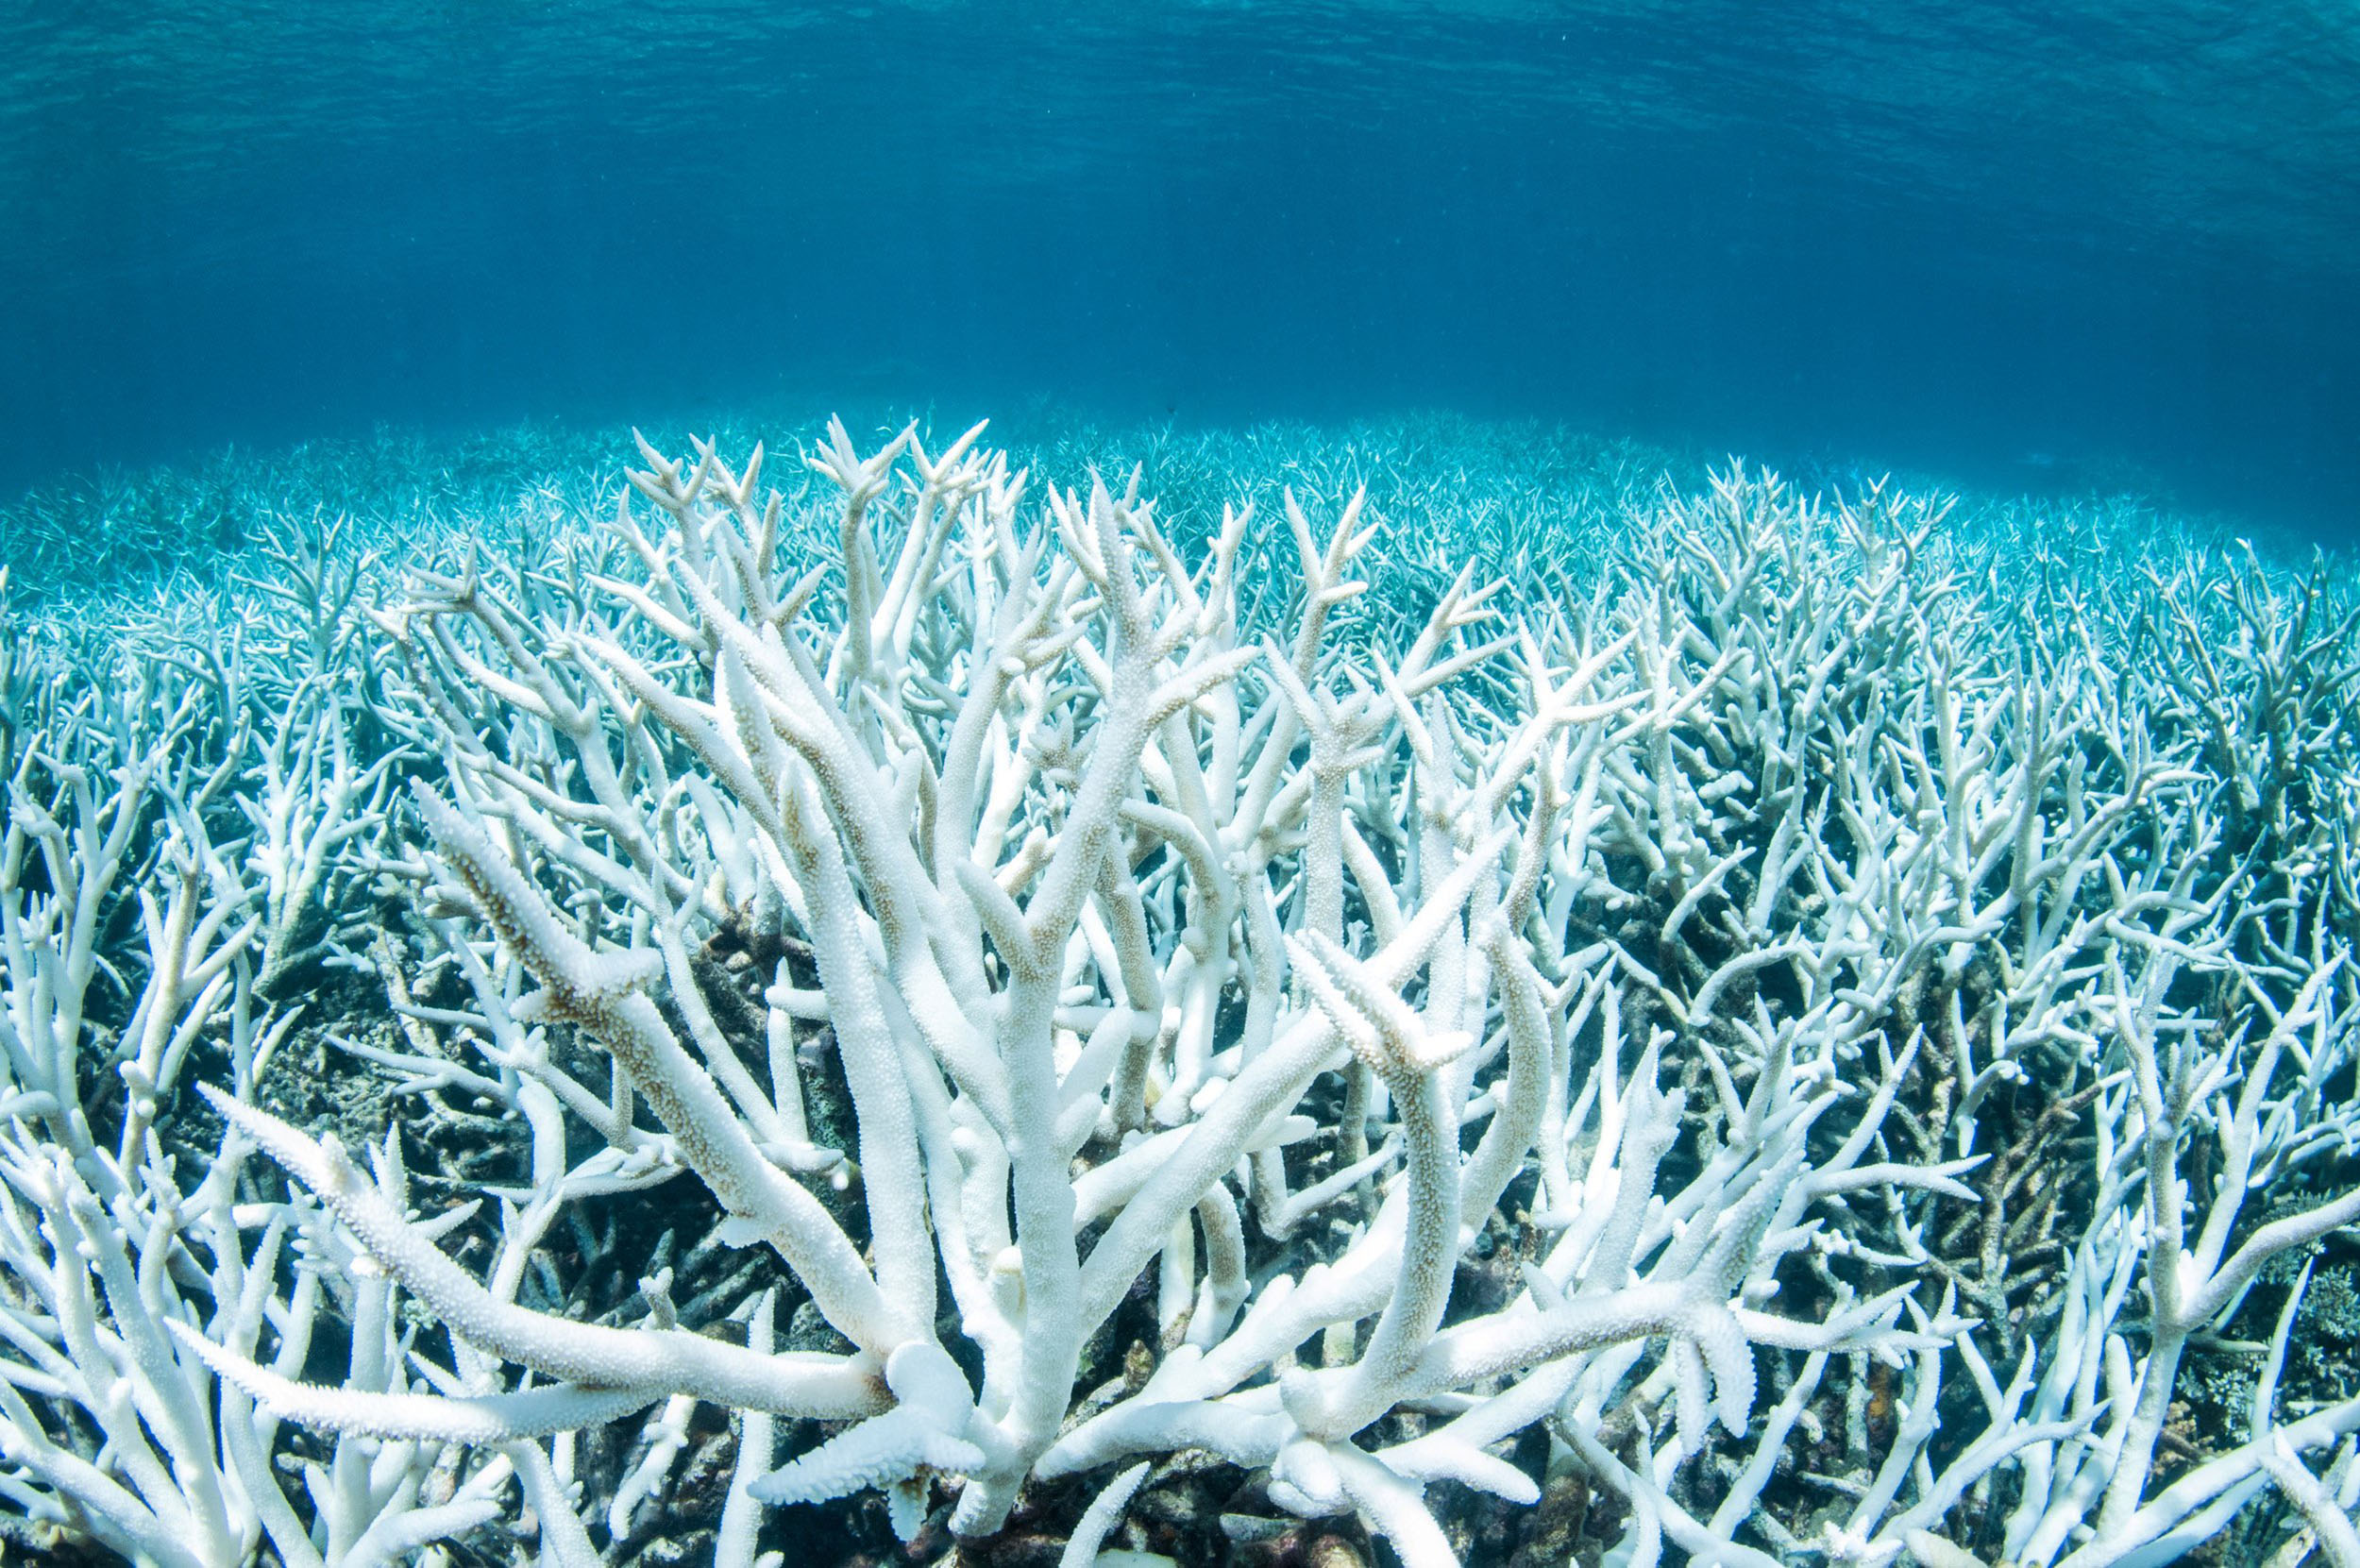 The Great Barrier Reef's conditions worry scientists; UNESCO urged to declare it "endangered"